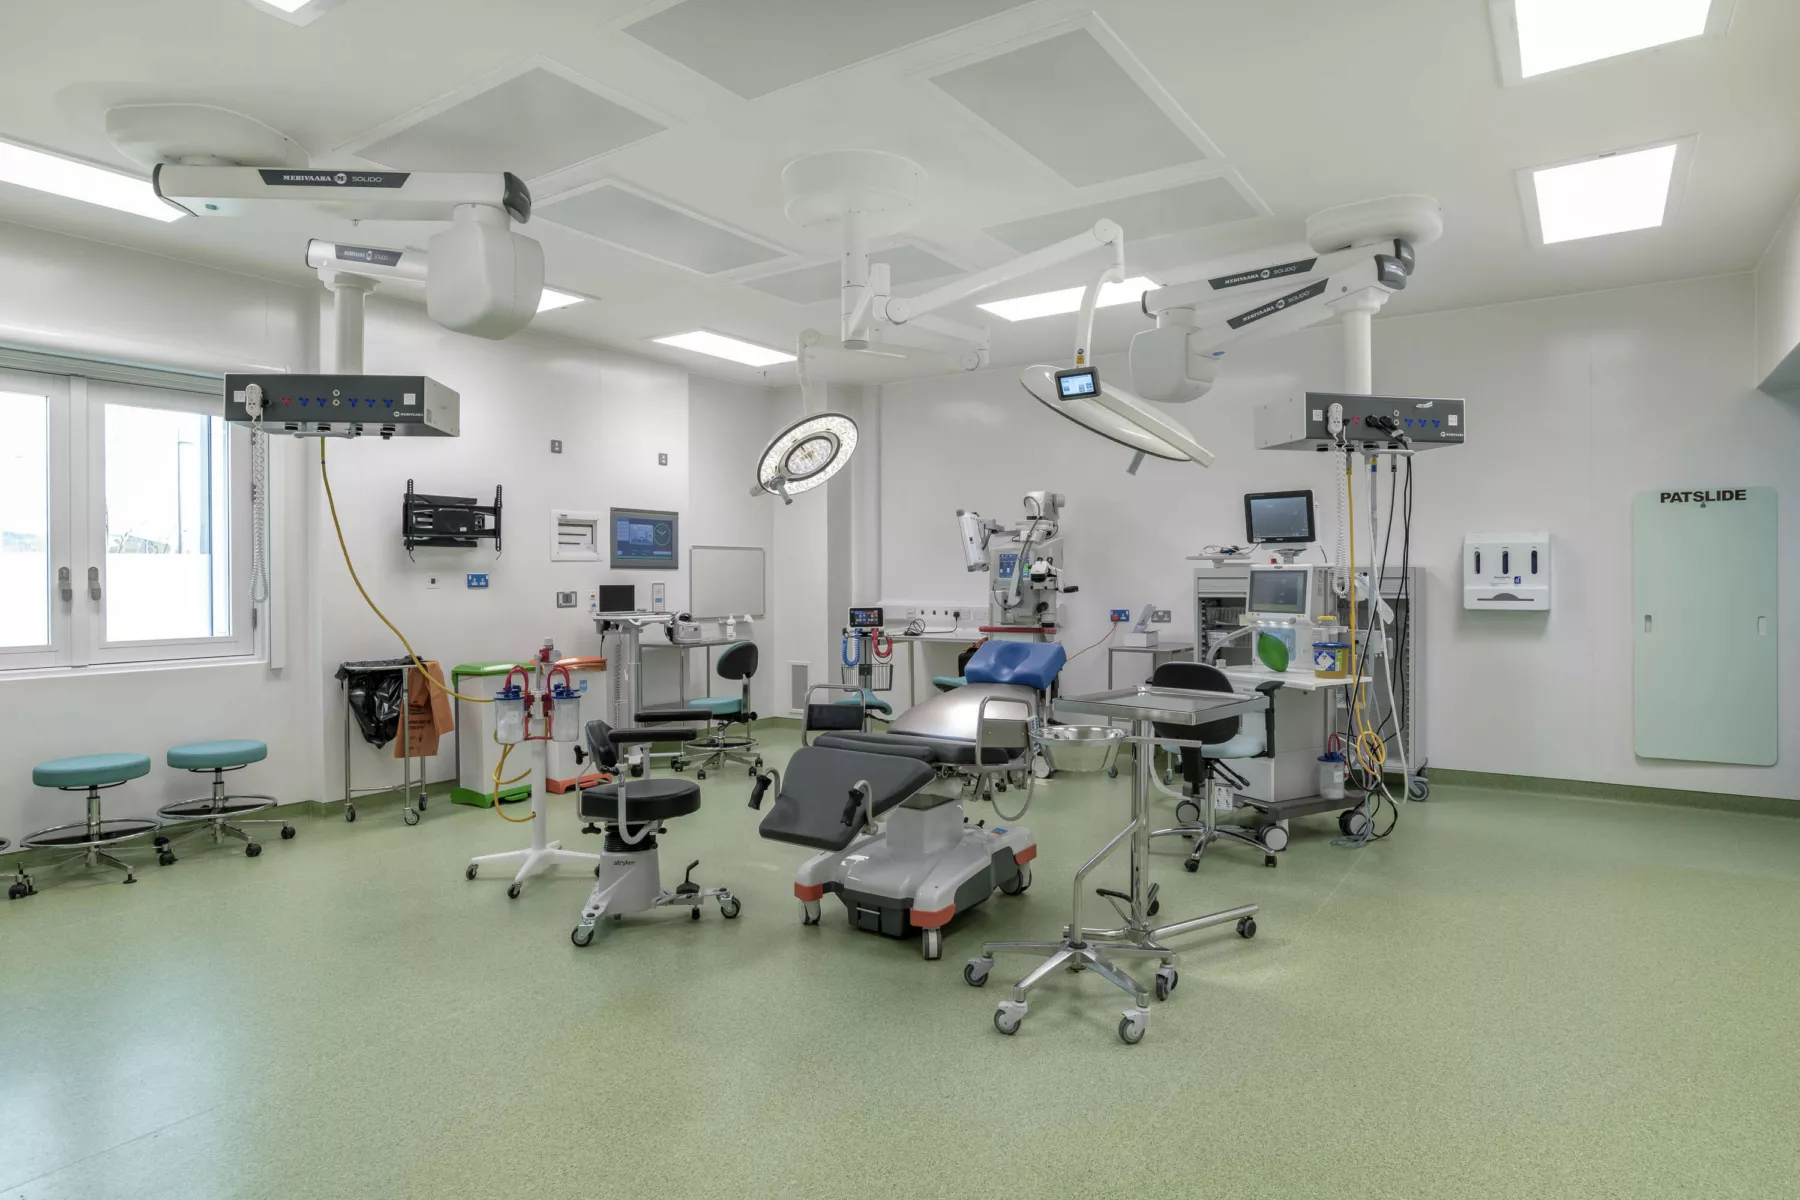 Opthalmology operating theatre at National Treatment Centre - Highland, in Inverness Scotland. Operating chair, lighting and equipment in a brightly lit theatre.